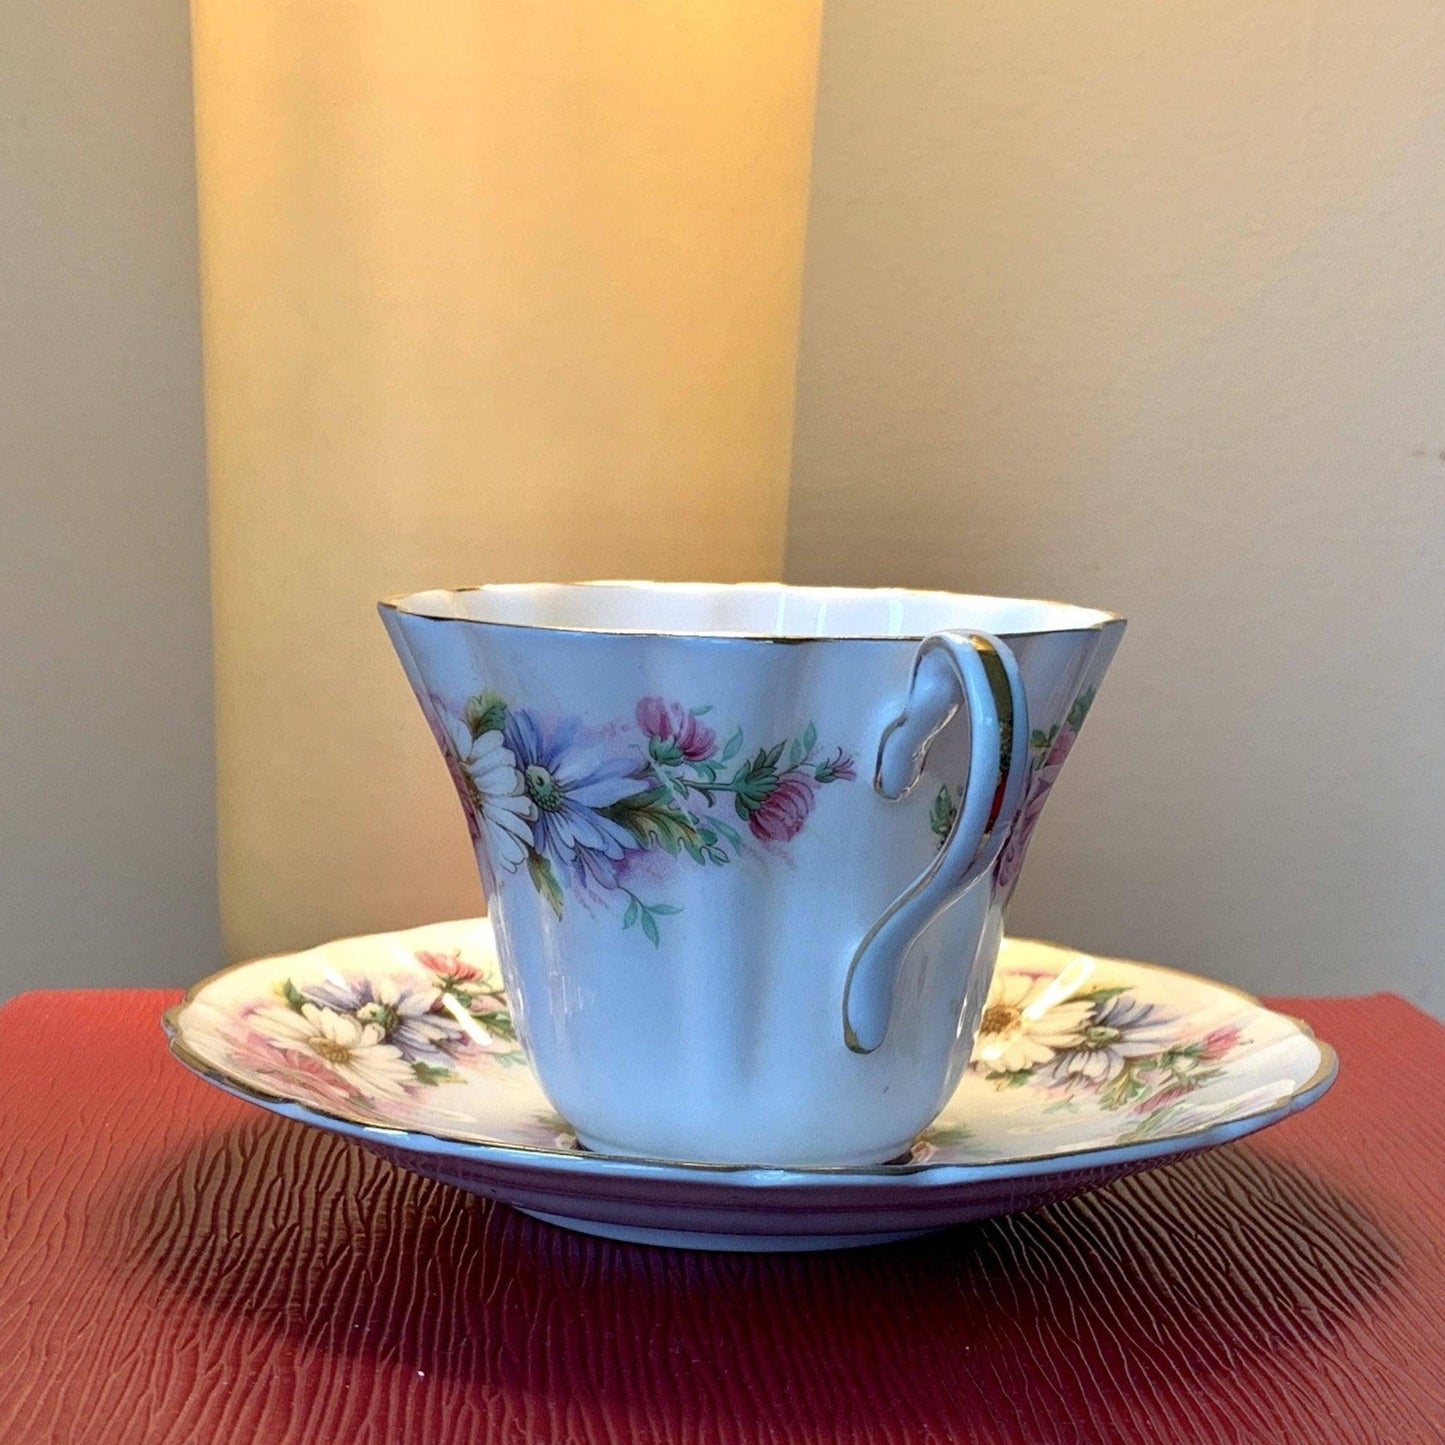 Royal Stafford Bone China in the “Daisy Chain” Pattern Vintage Teacup Saucer Set